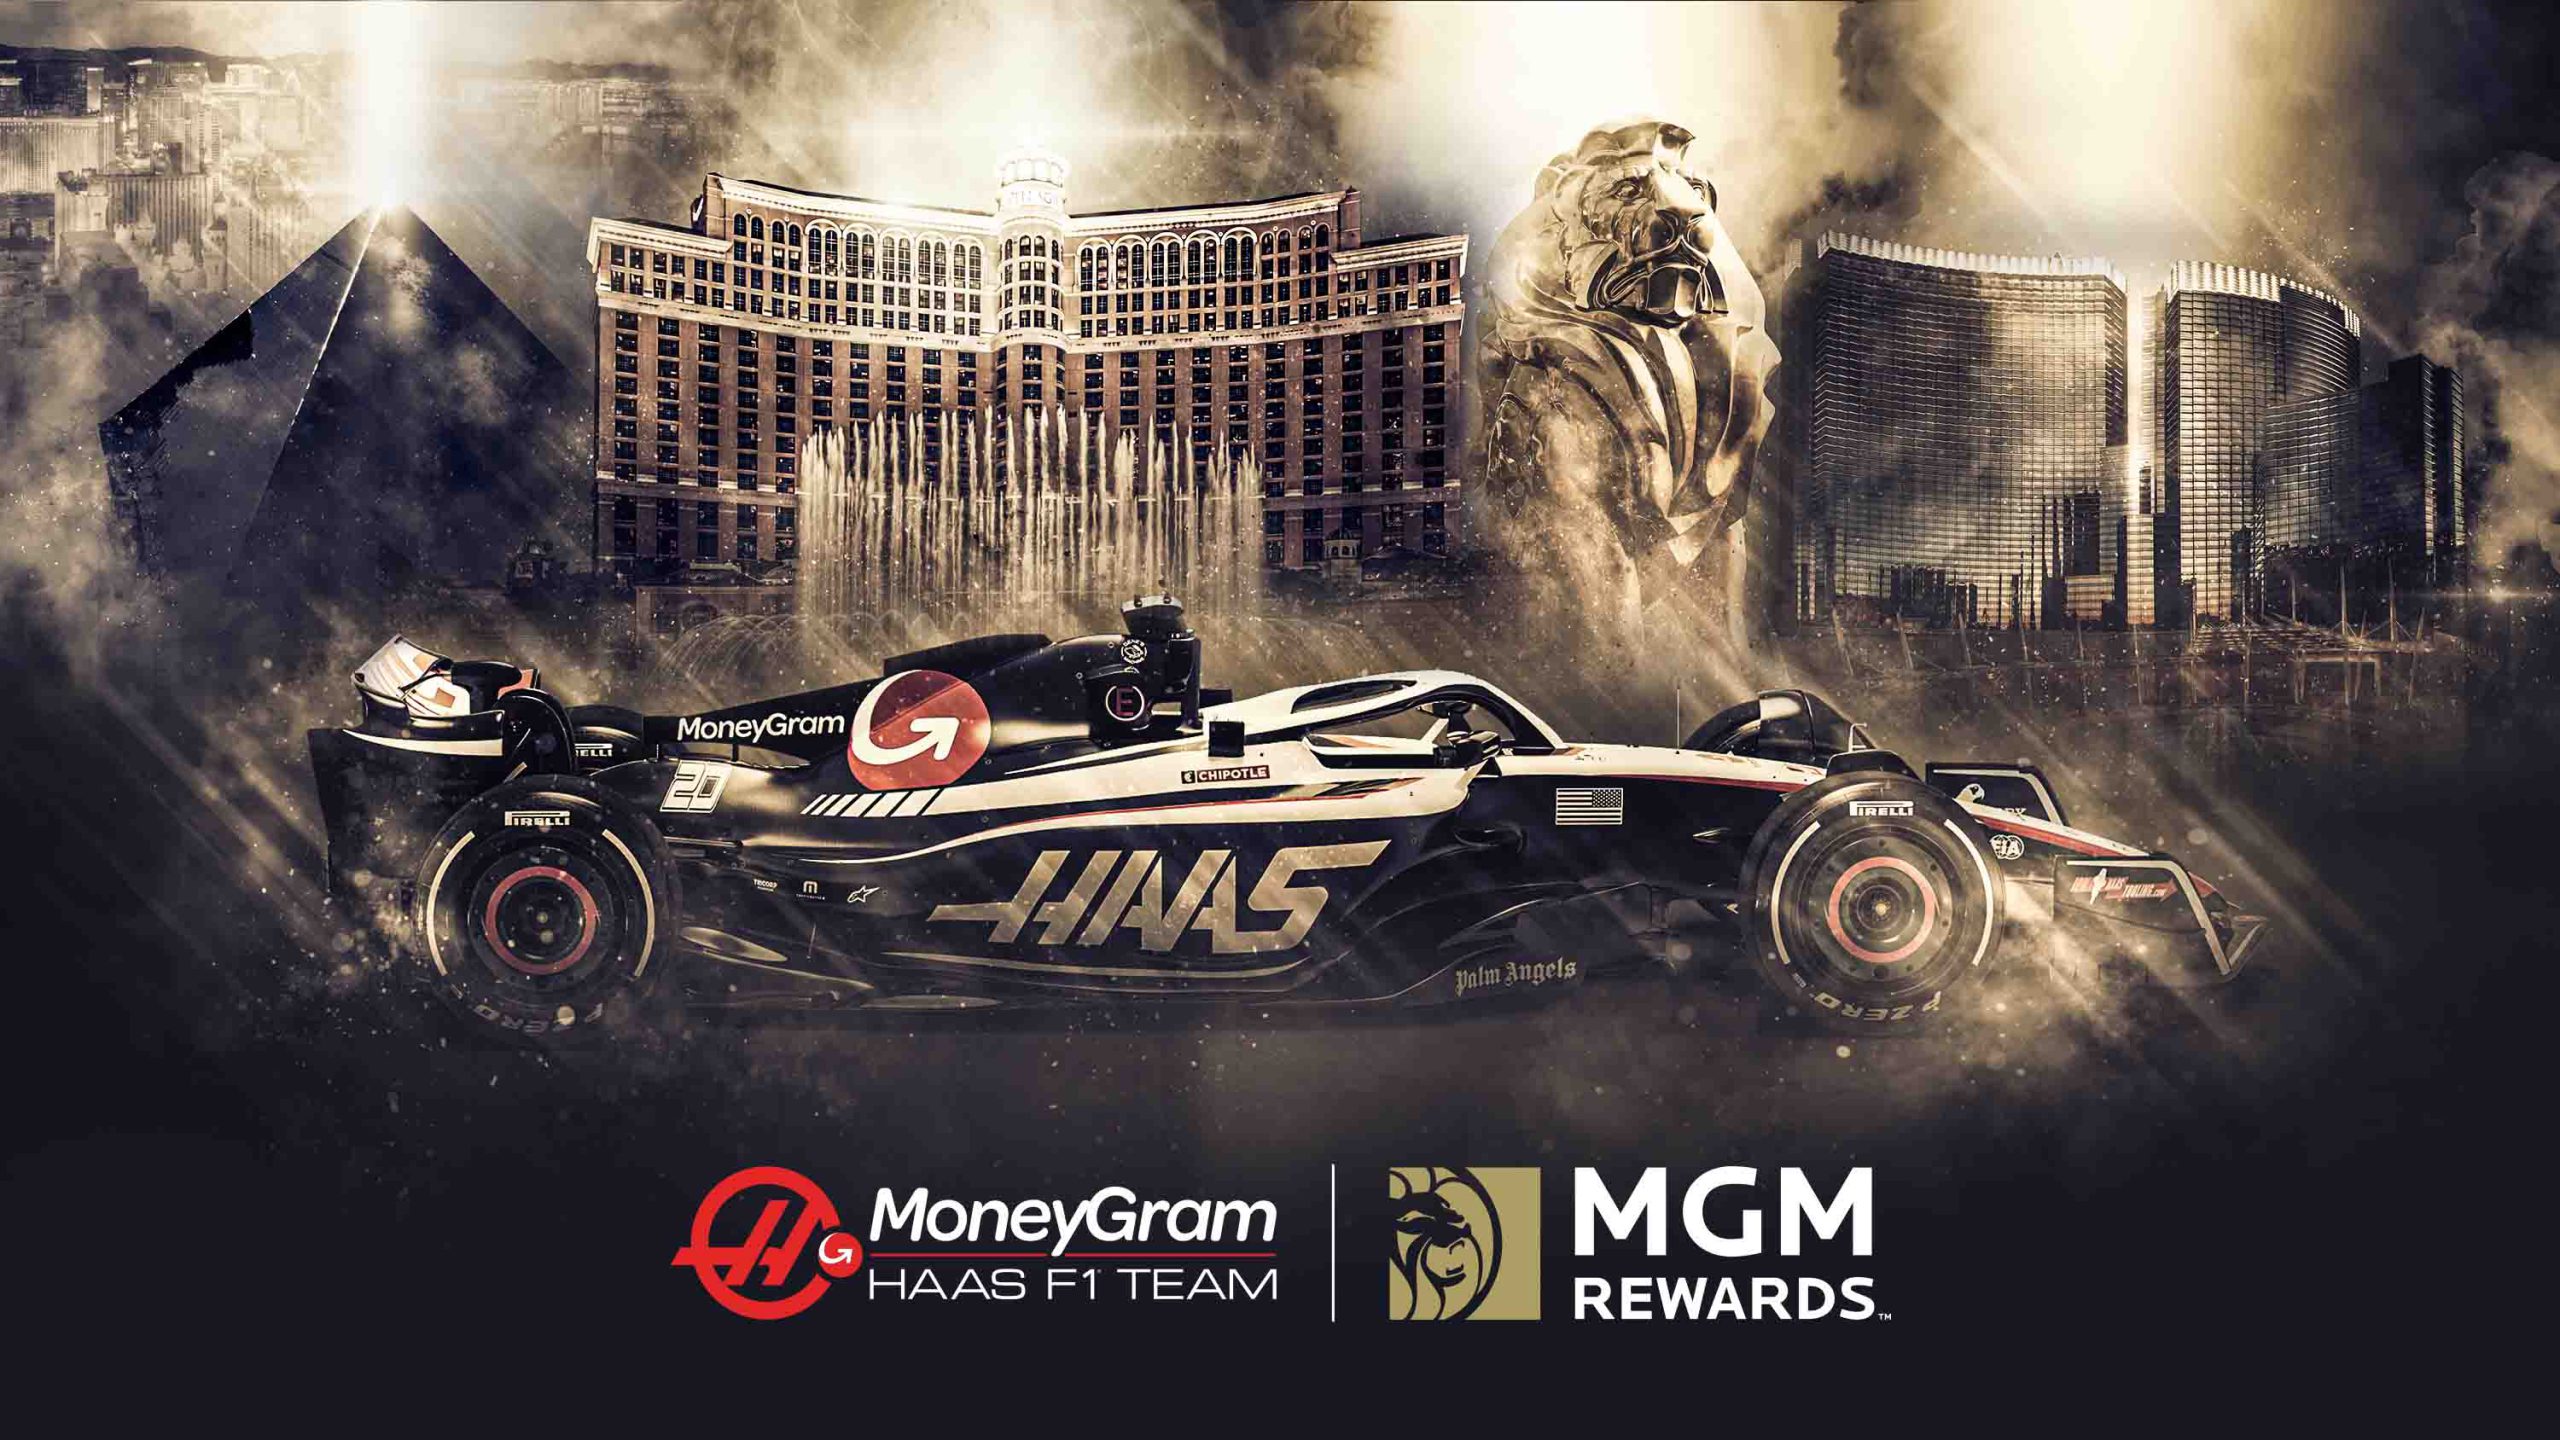 does mgm resorts have a cryptocurrency coin